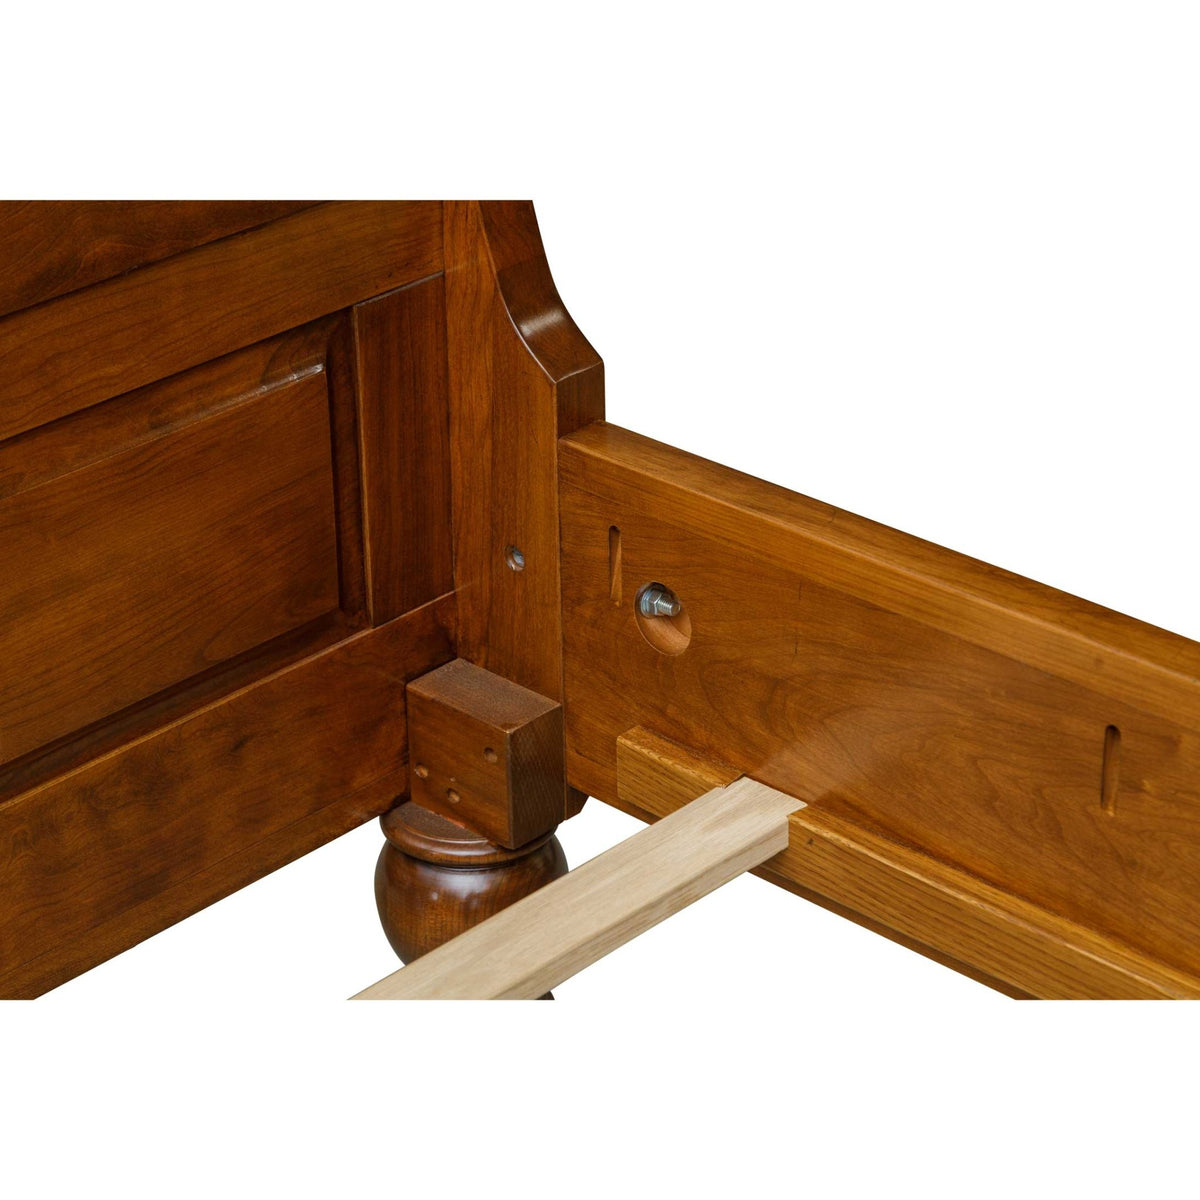 Amish Rustic Wood Telluride Sleigh Bed - snyders.furniture